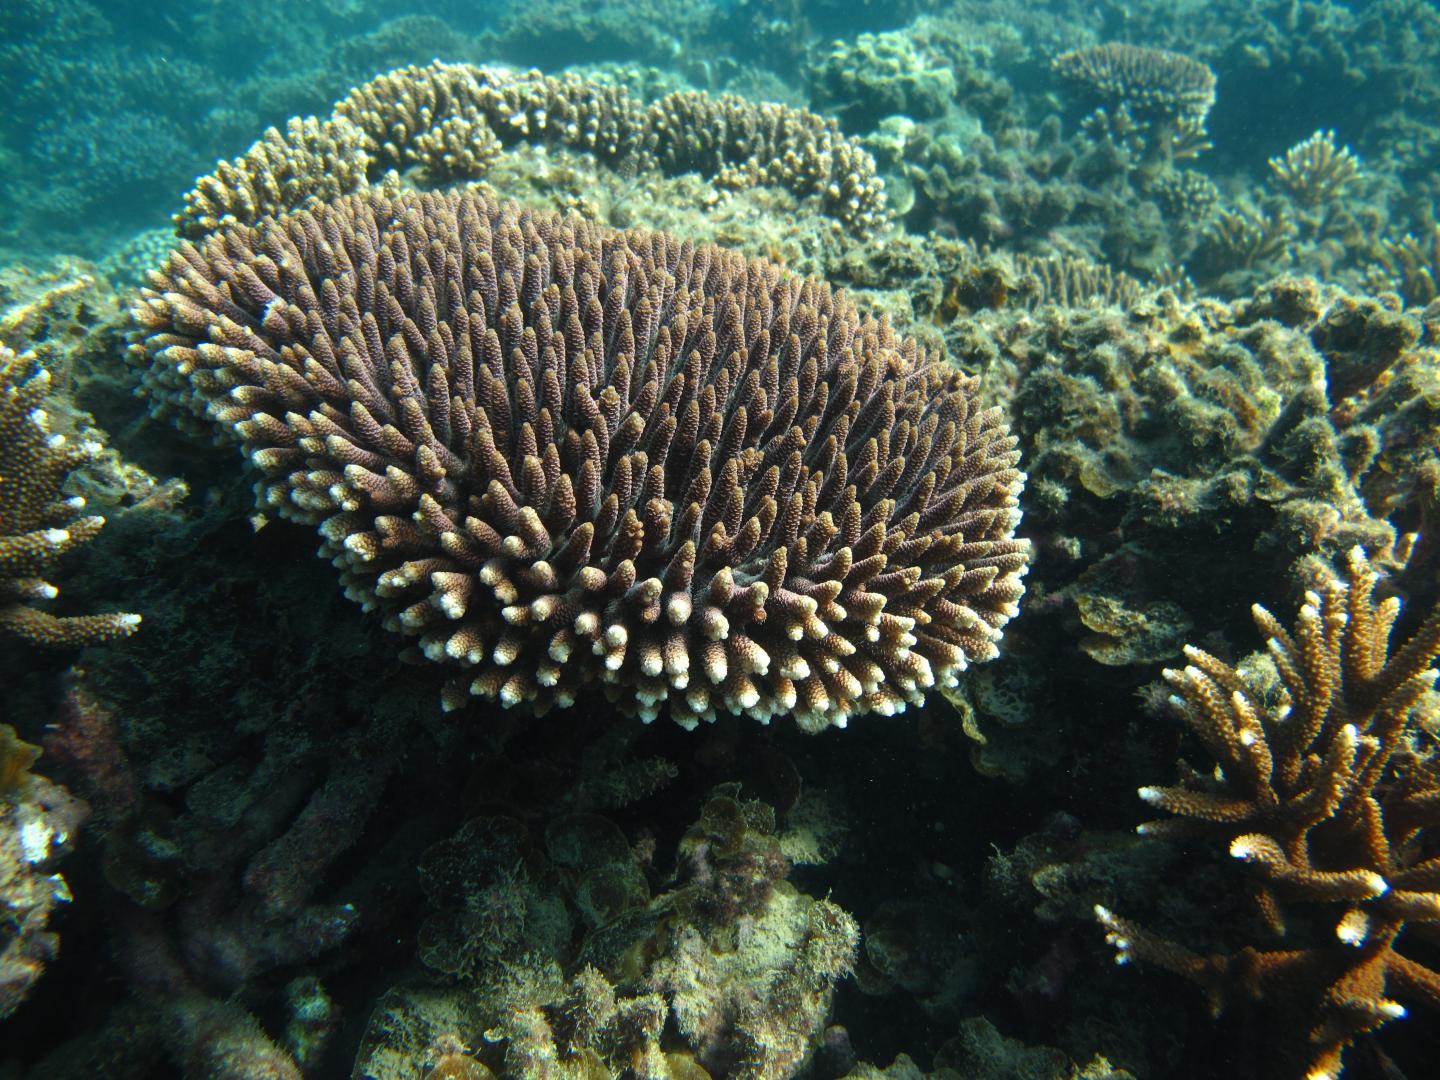 Acropora millepora coral - Stock Image - C026/5433 - Science Photo Library